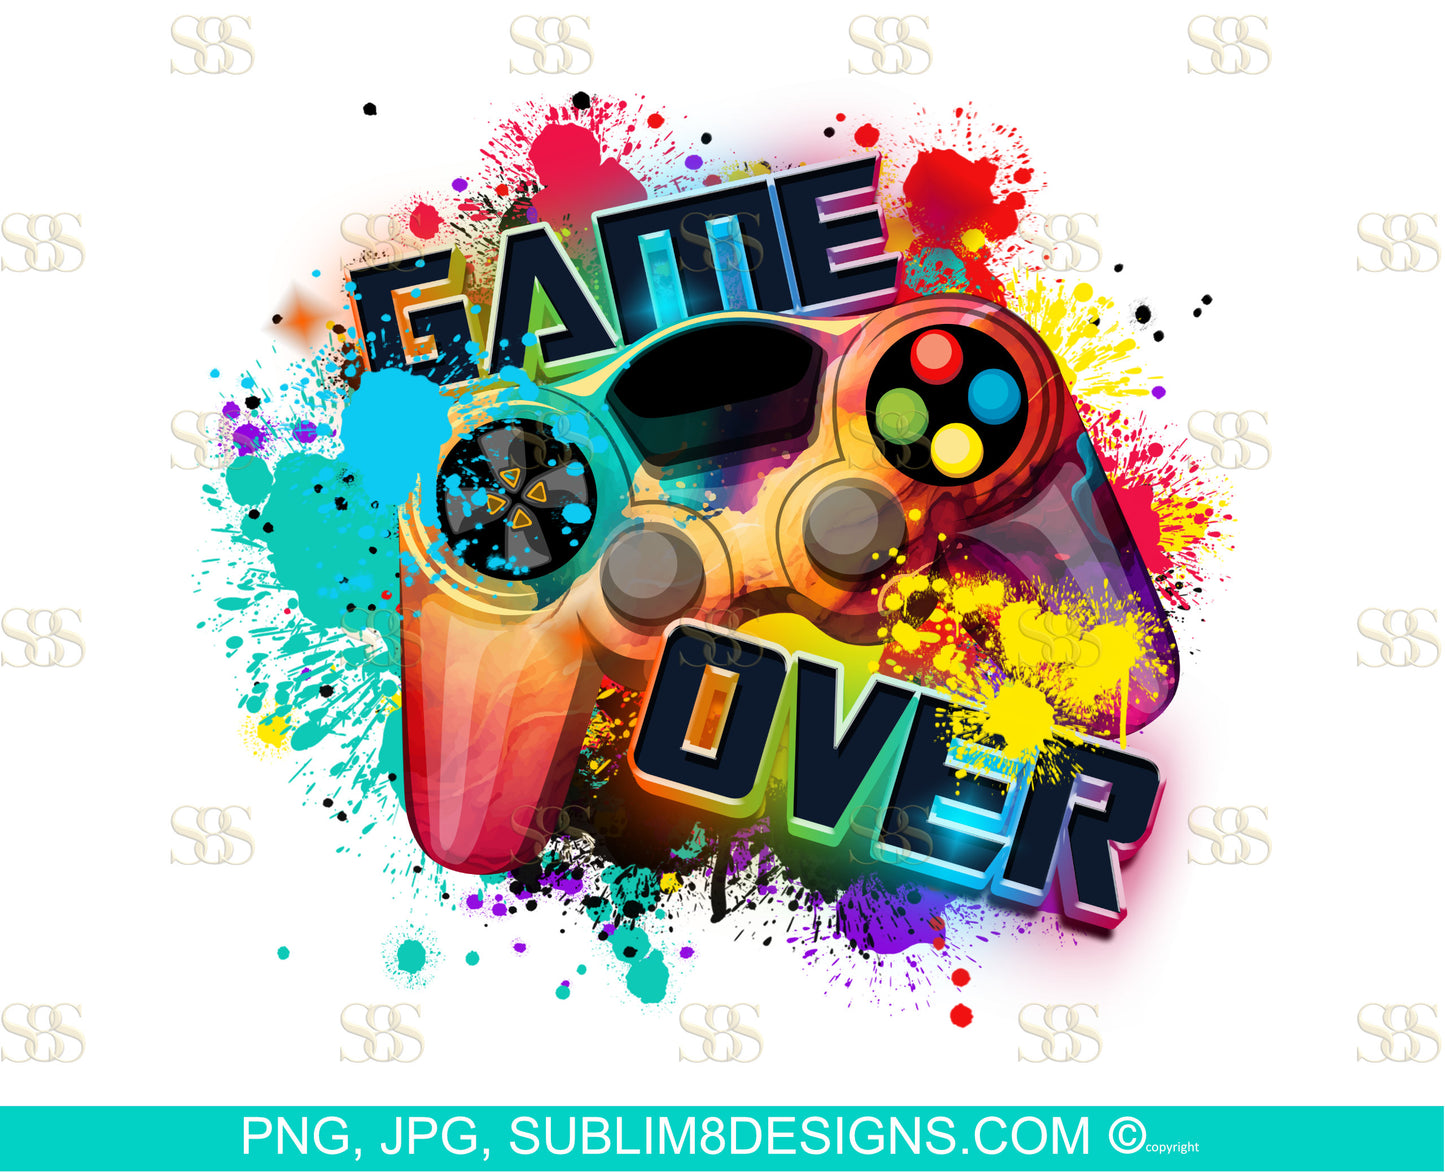 Game Over Colorful Controller Sublimation T-shirt Design PNG and JPEG ONLY